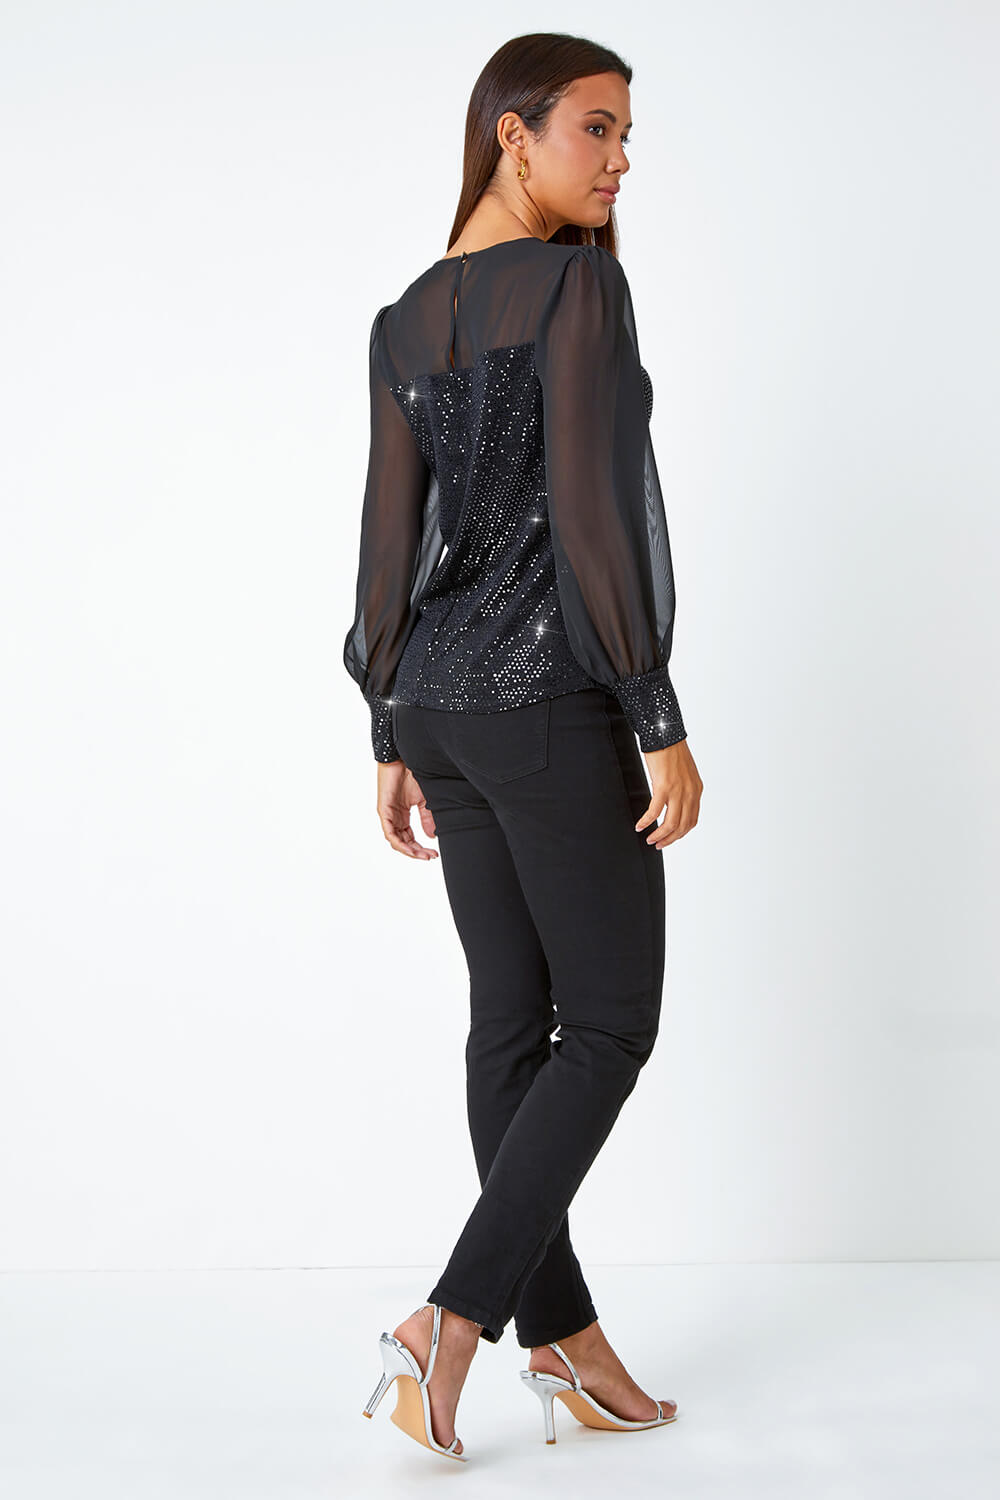 Black Sequin Chiffon Sleeve Stretch Top, Image 3 of 5